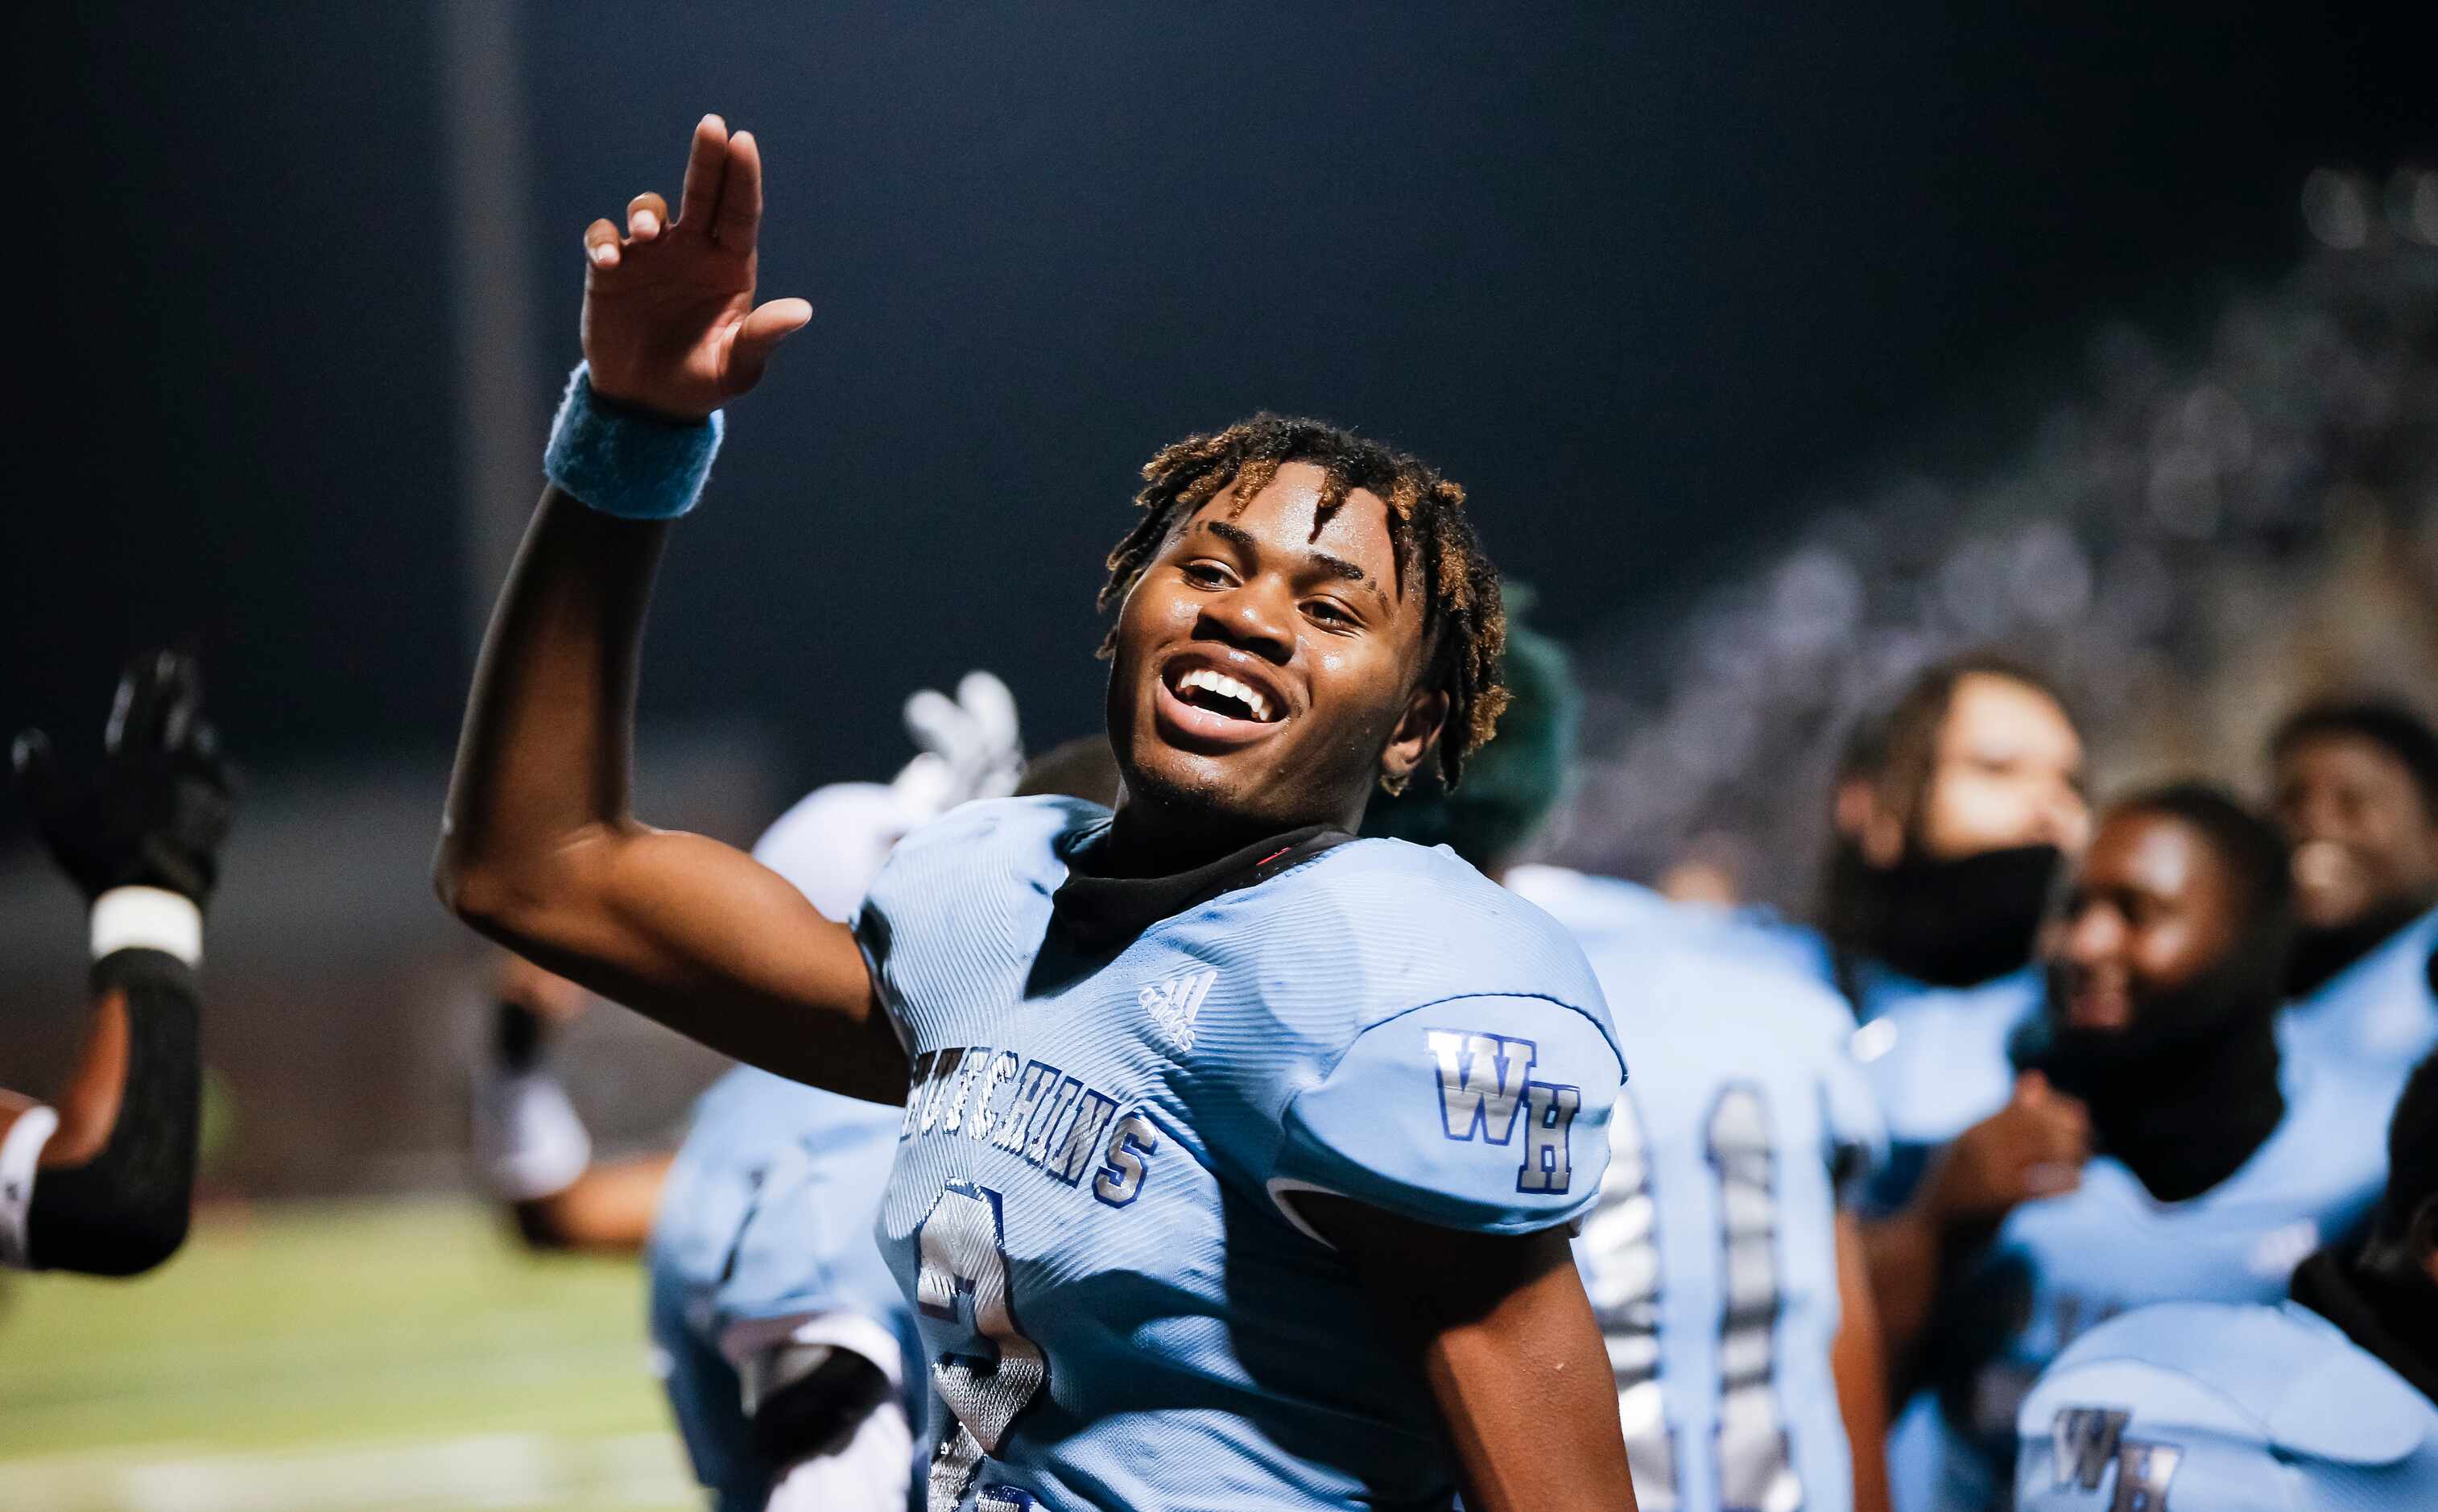 Wilmer-Hutchins senior quarterback Andre Henderson celebrates a 31-28 win over Kaufman after...